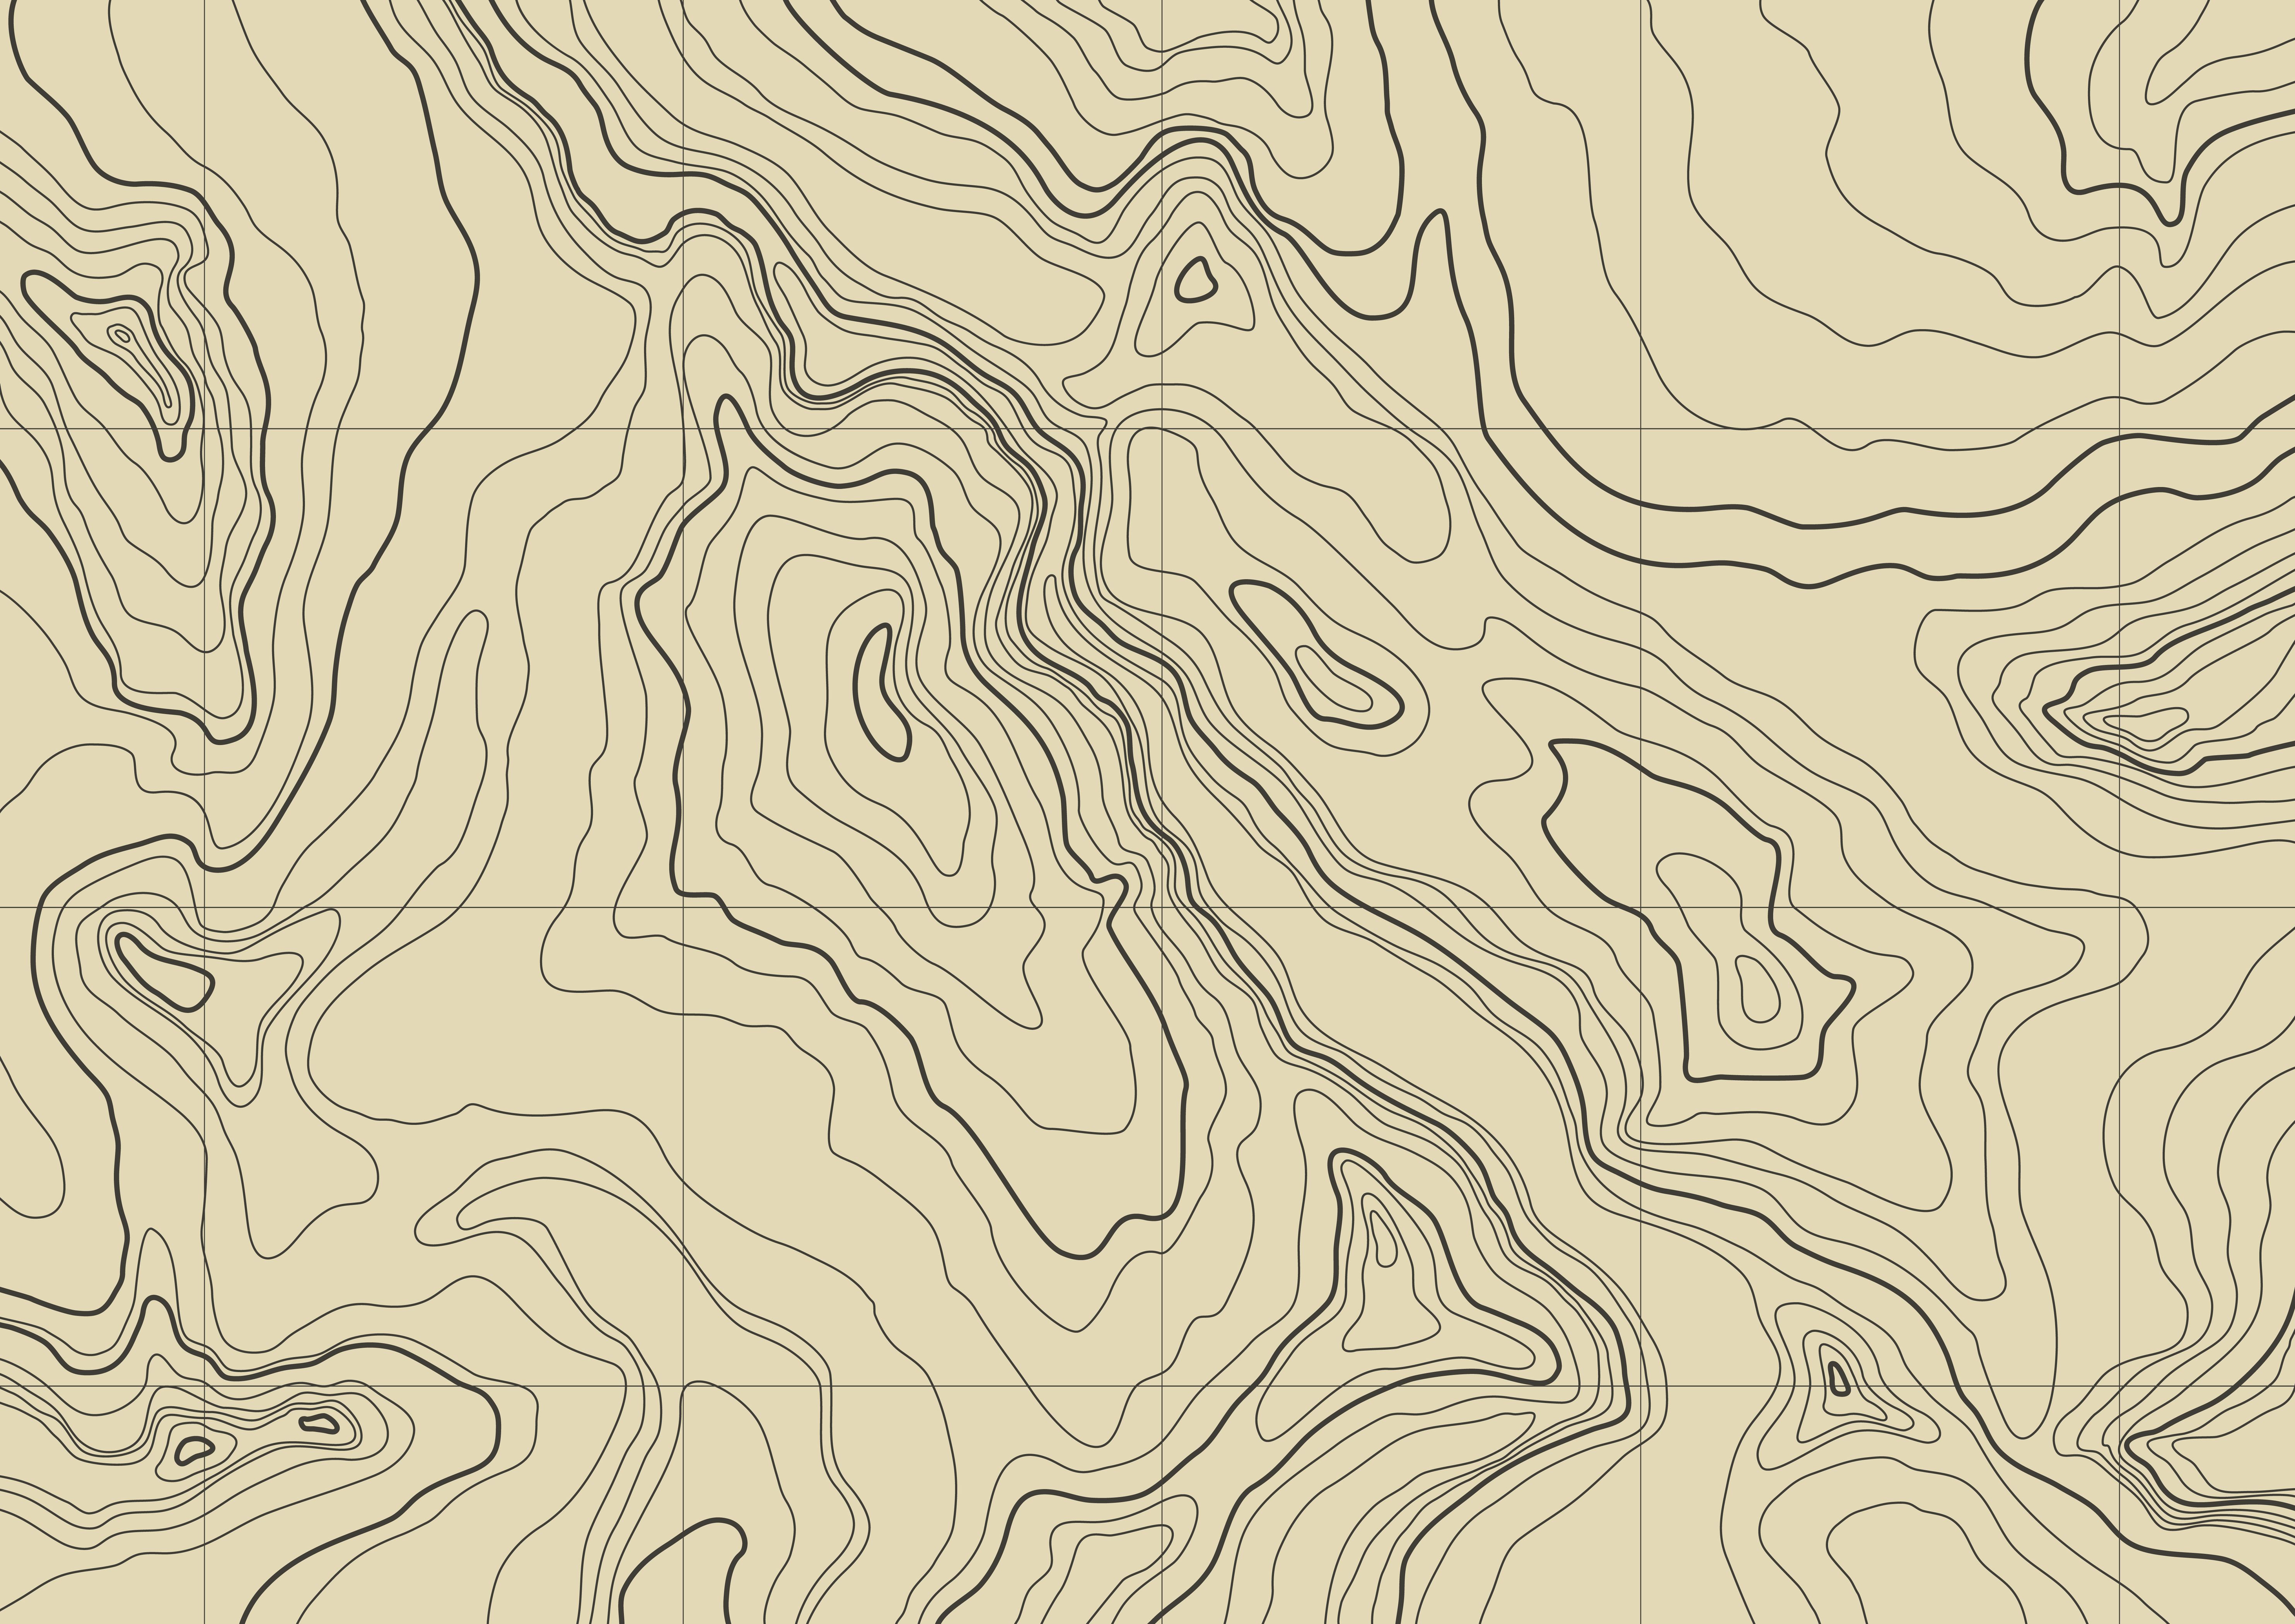 Topography Map Contour lines